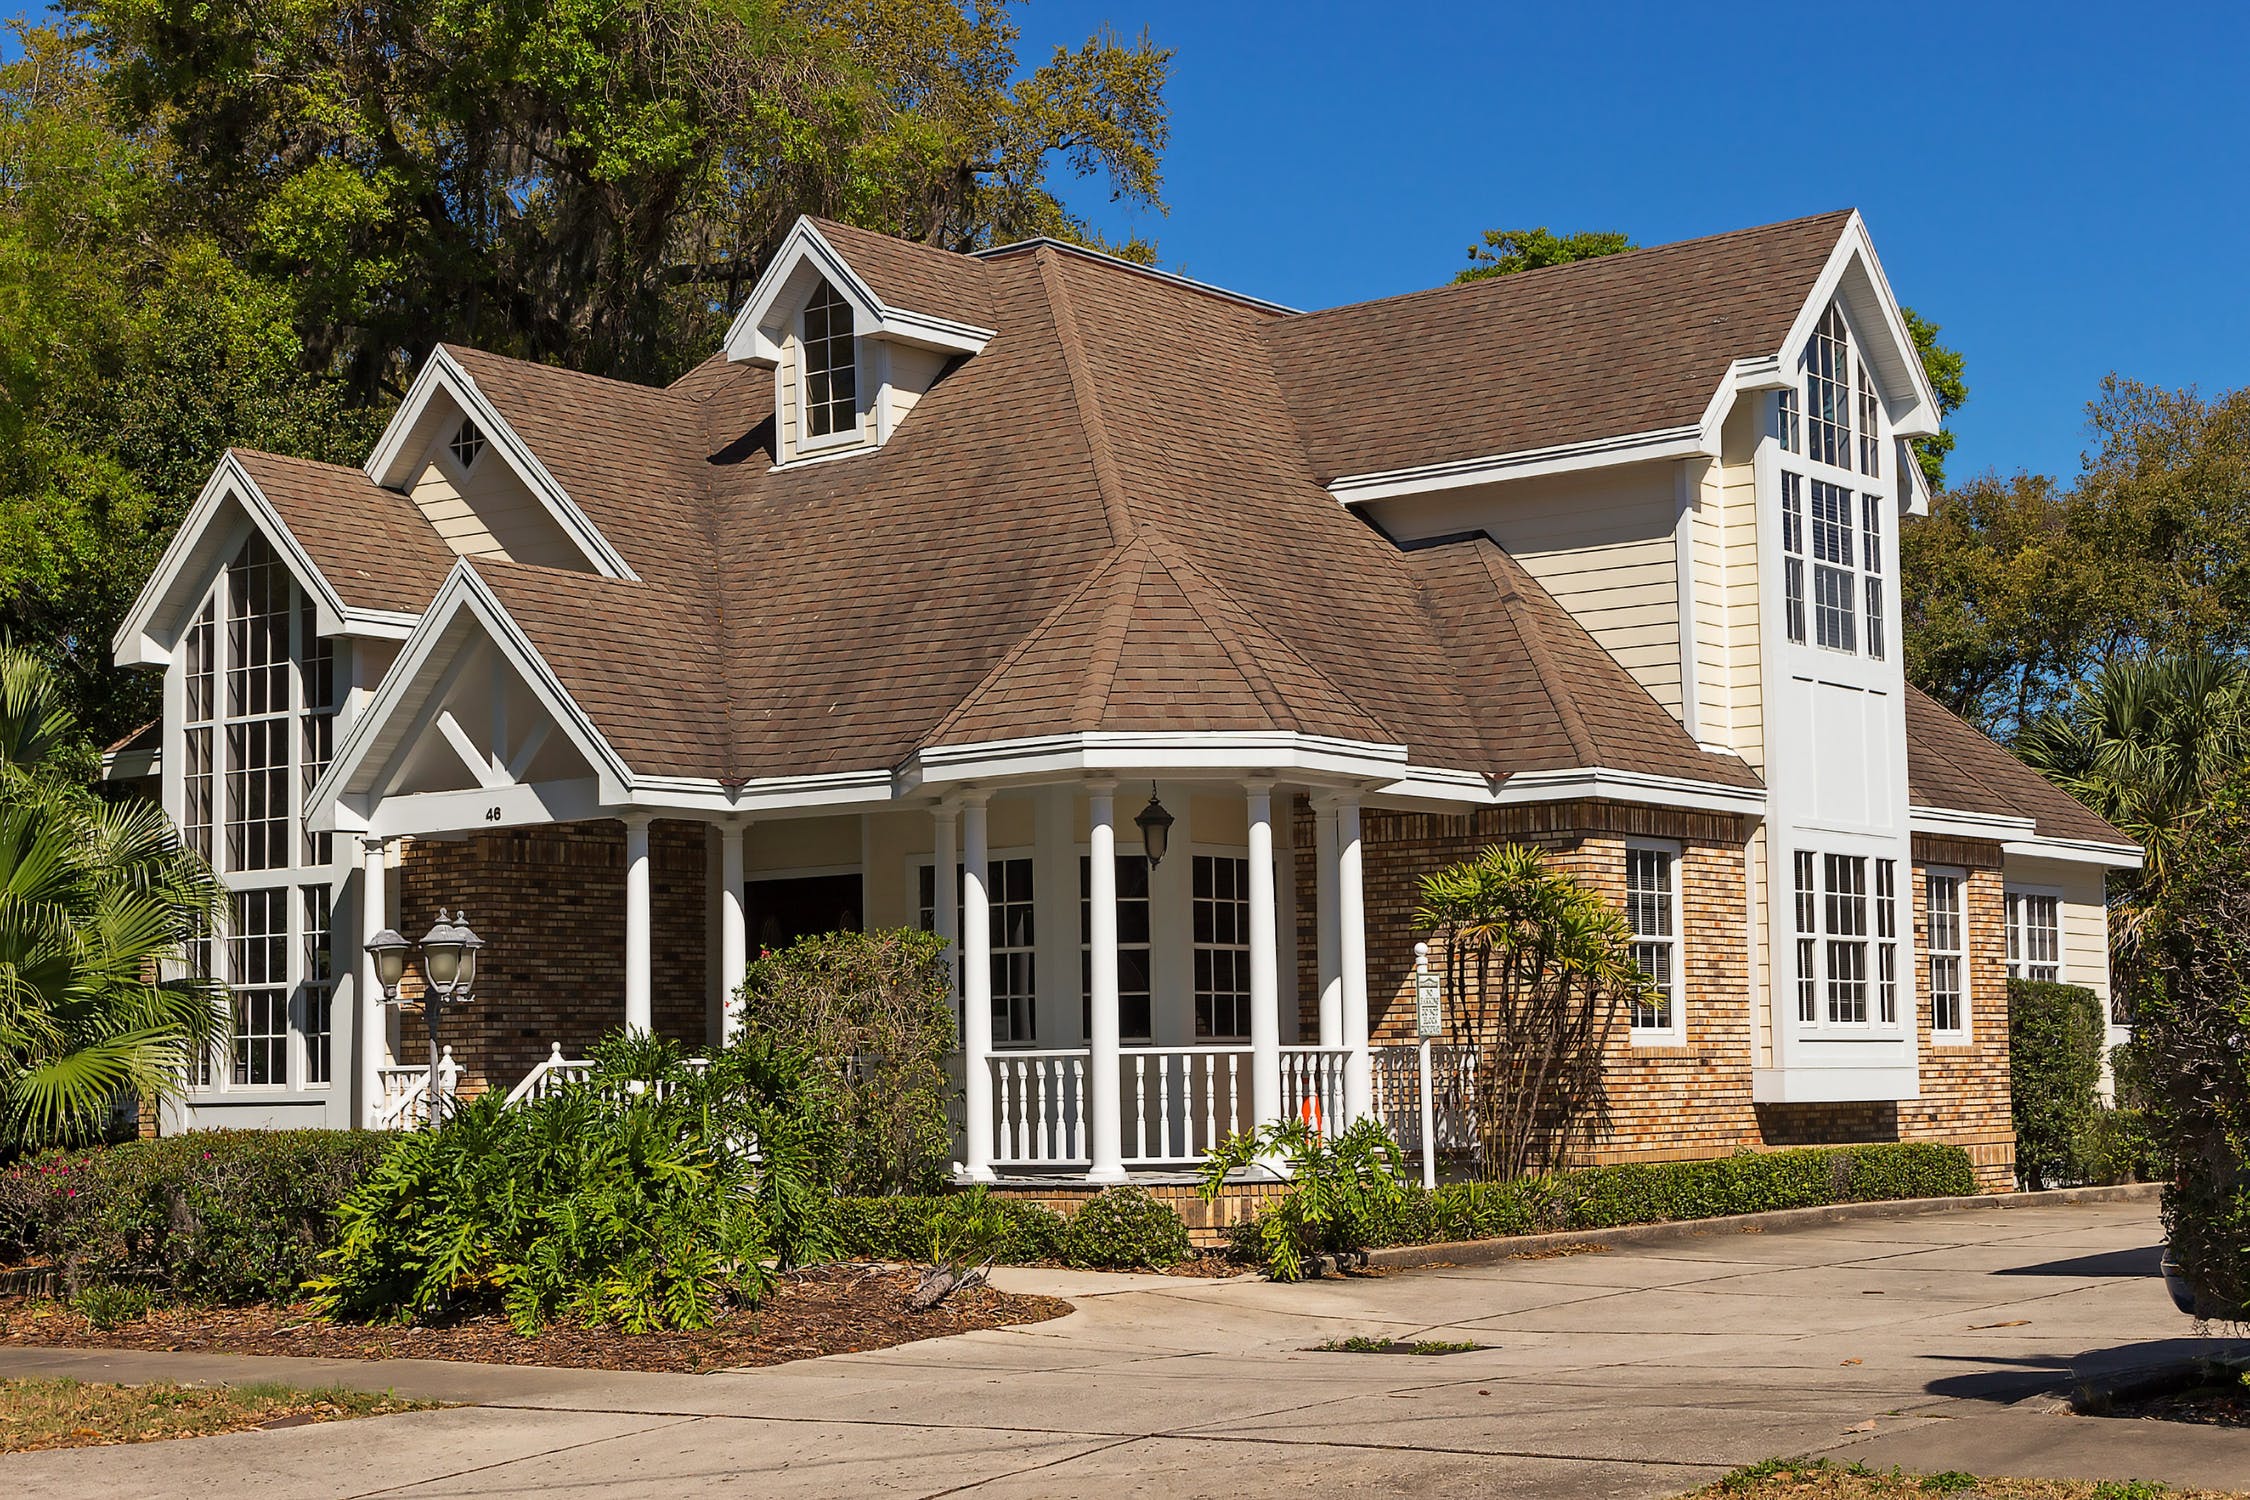 The Importance of a roof: Why every house needs it